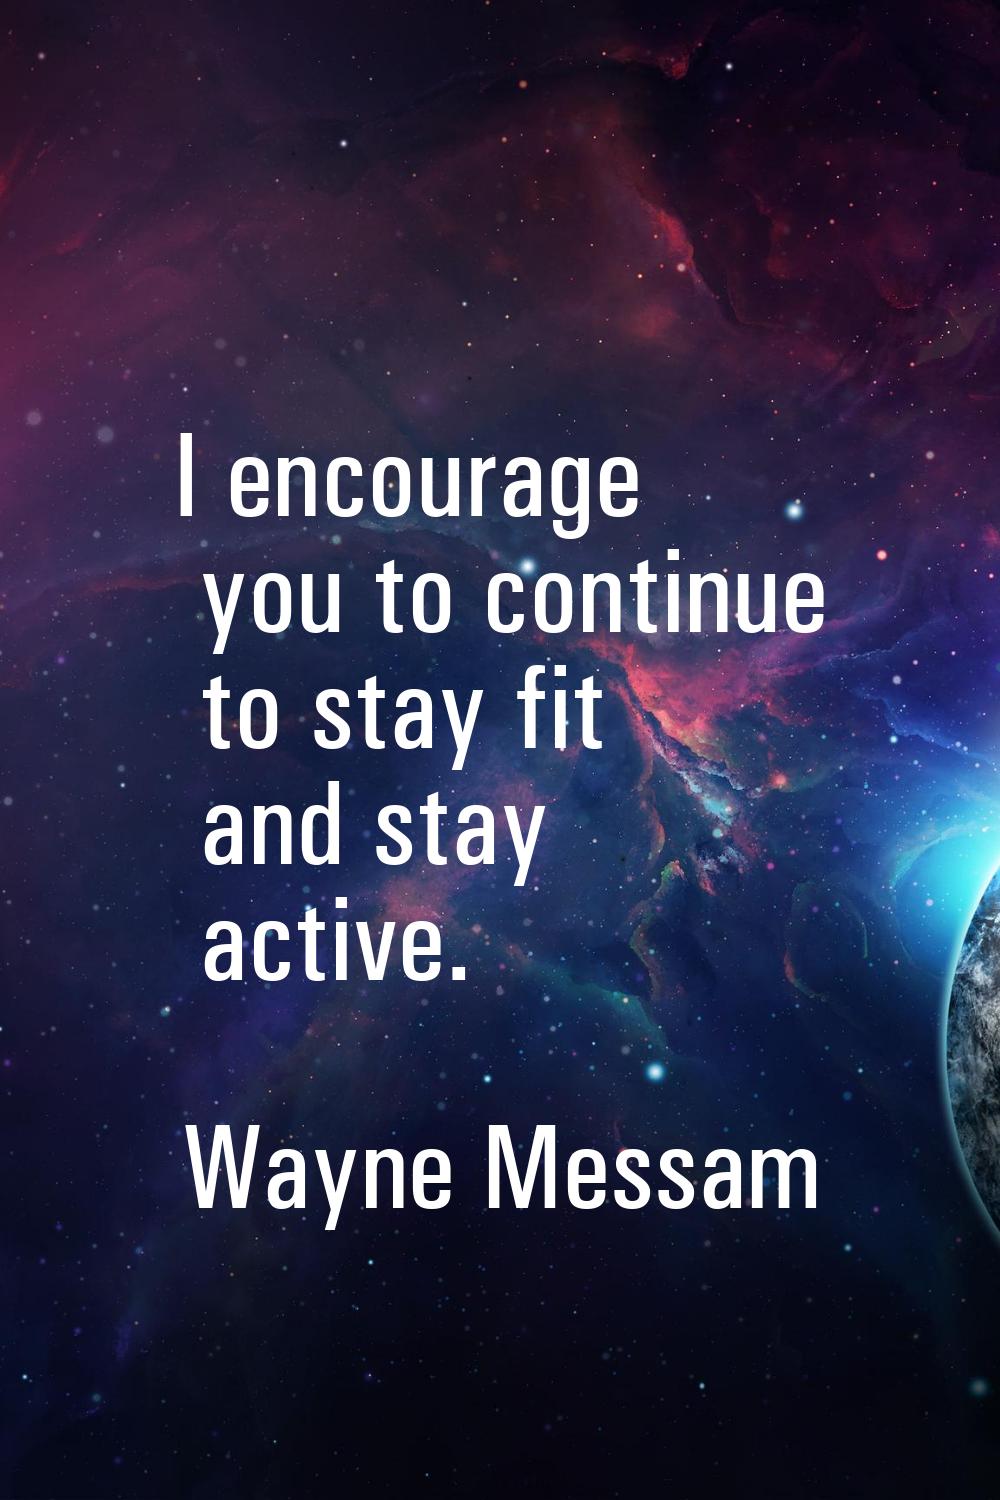 I encourage you to continue to stay fit and stay active.